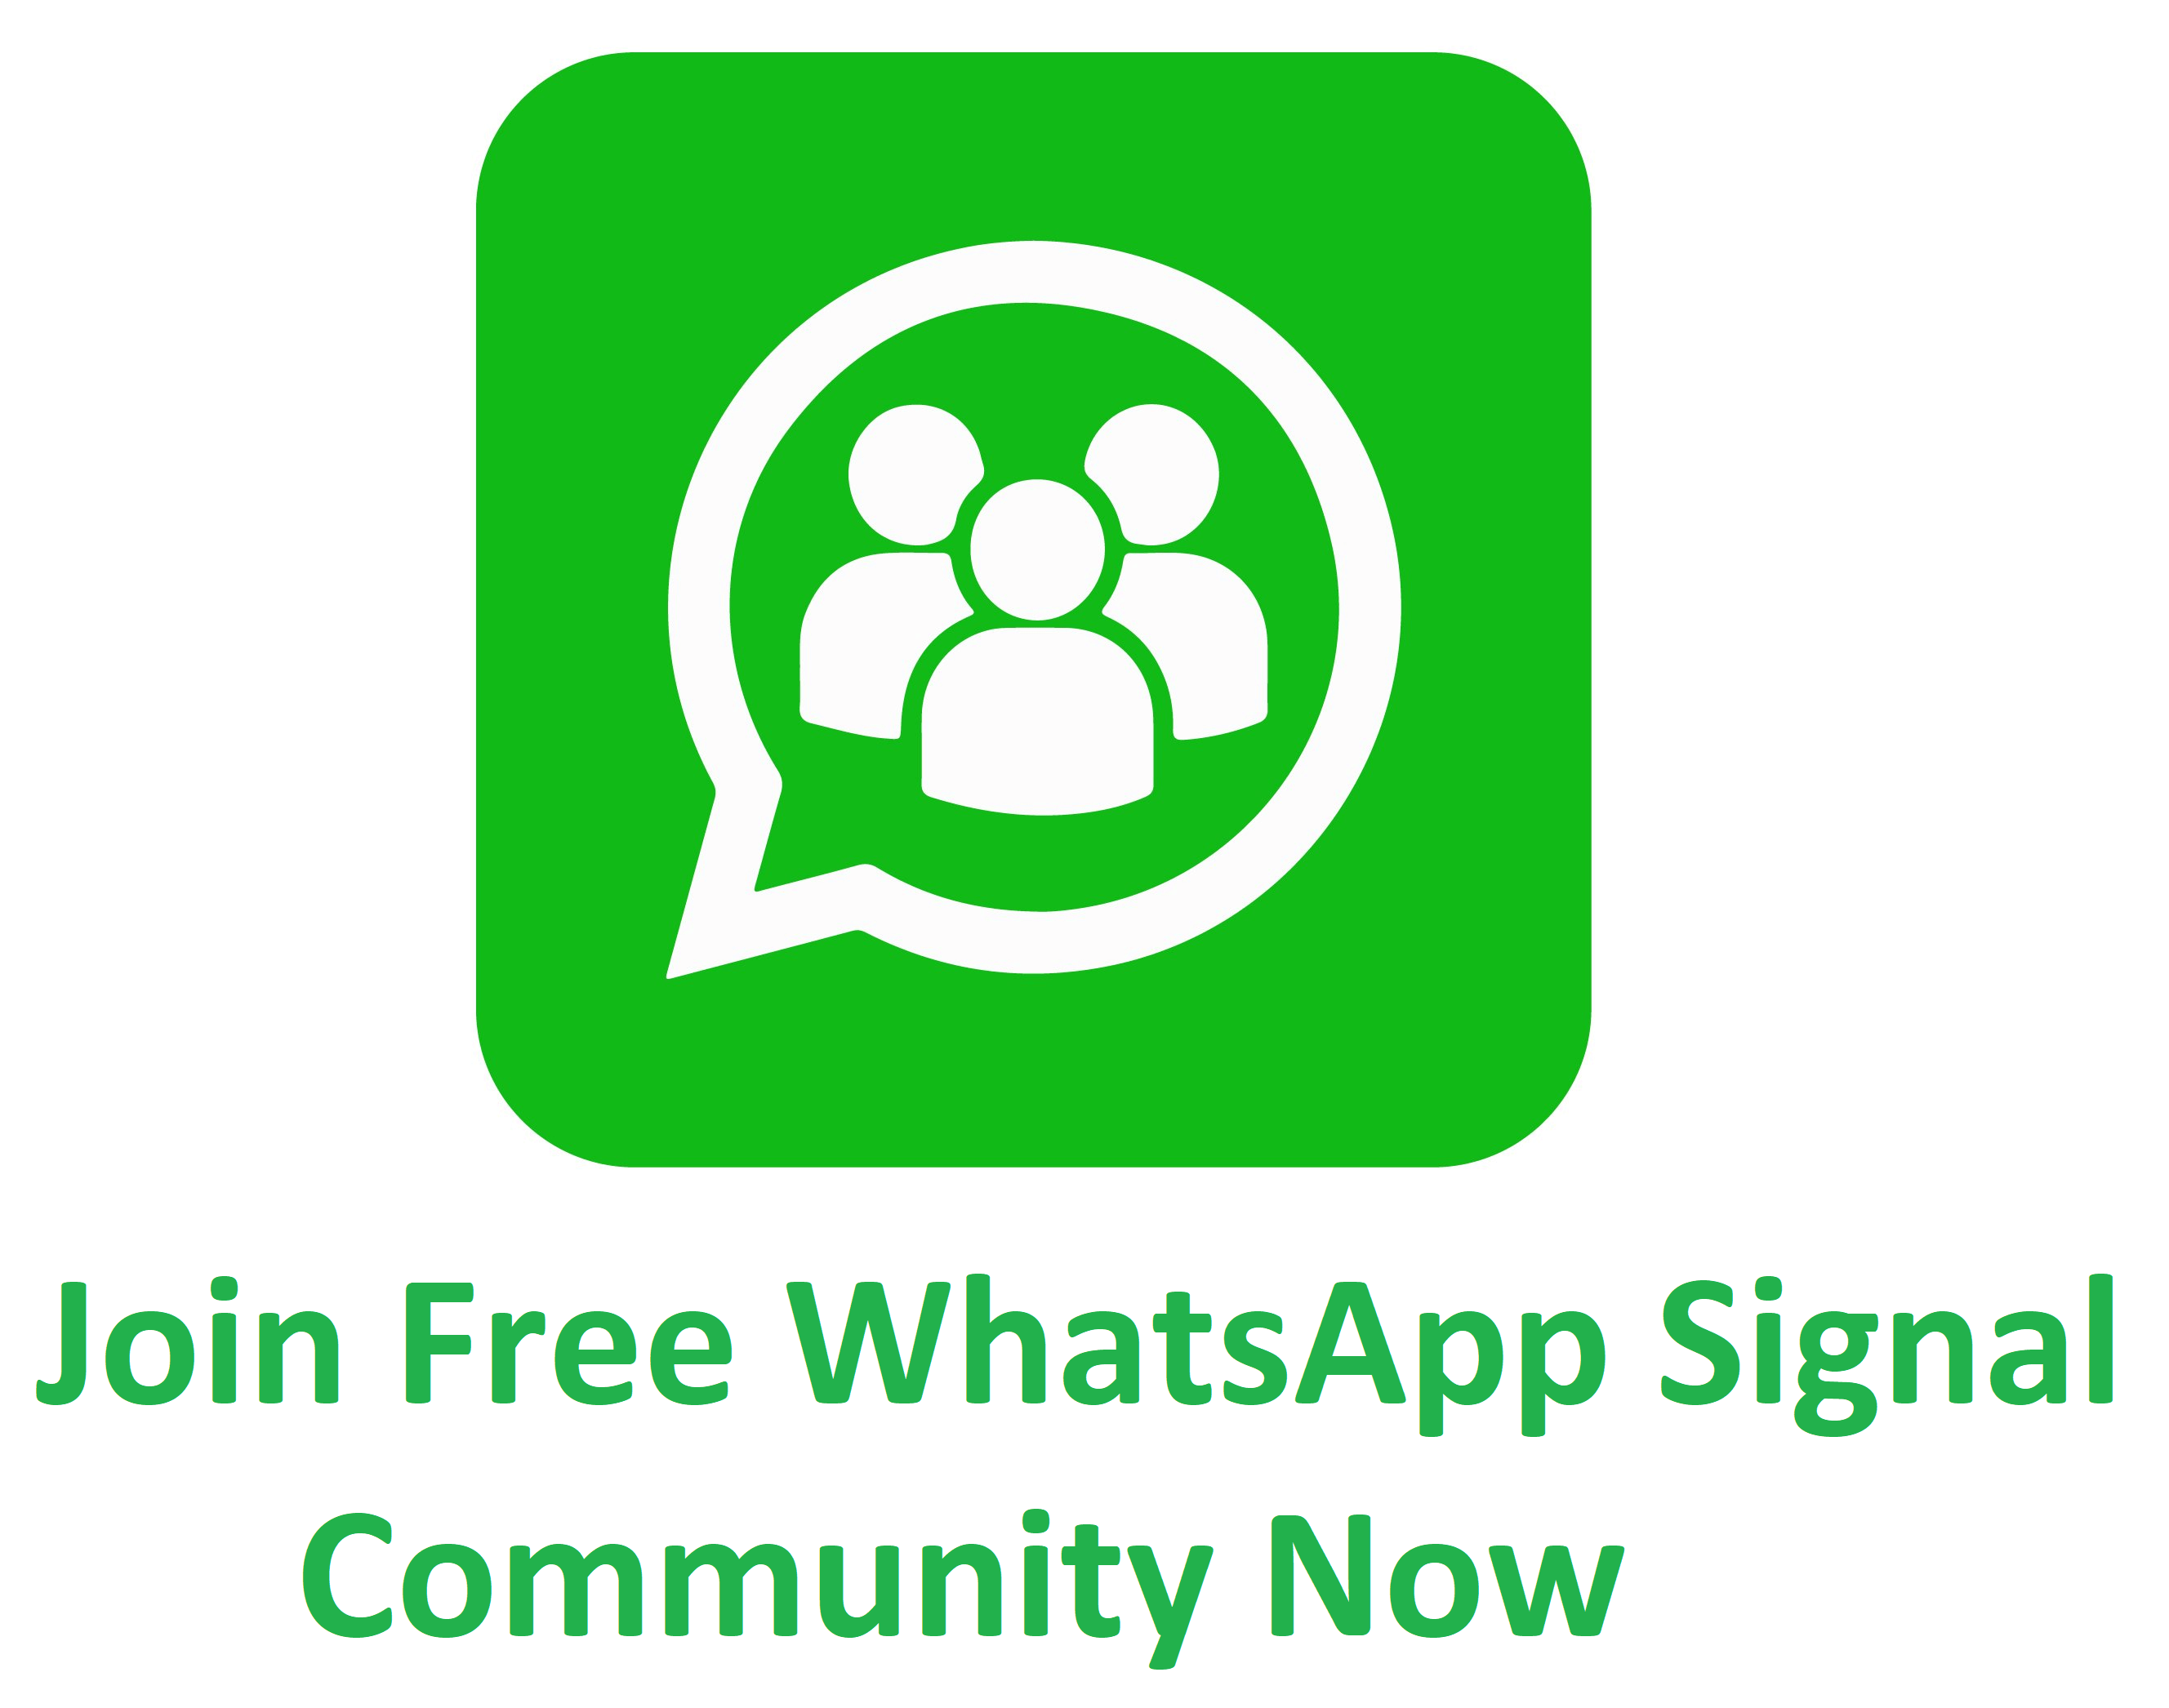 whatsapp community button join free now